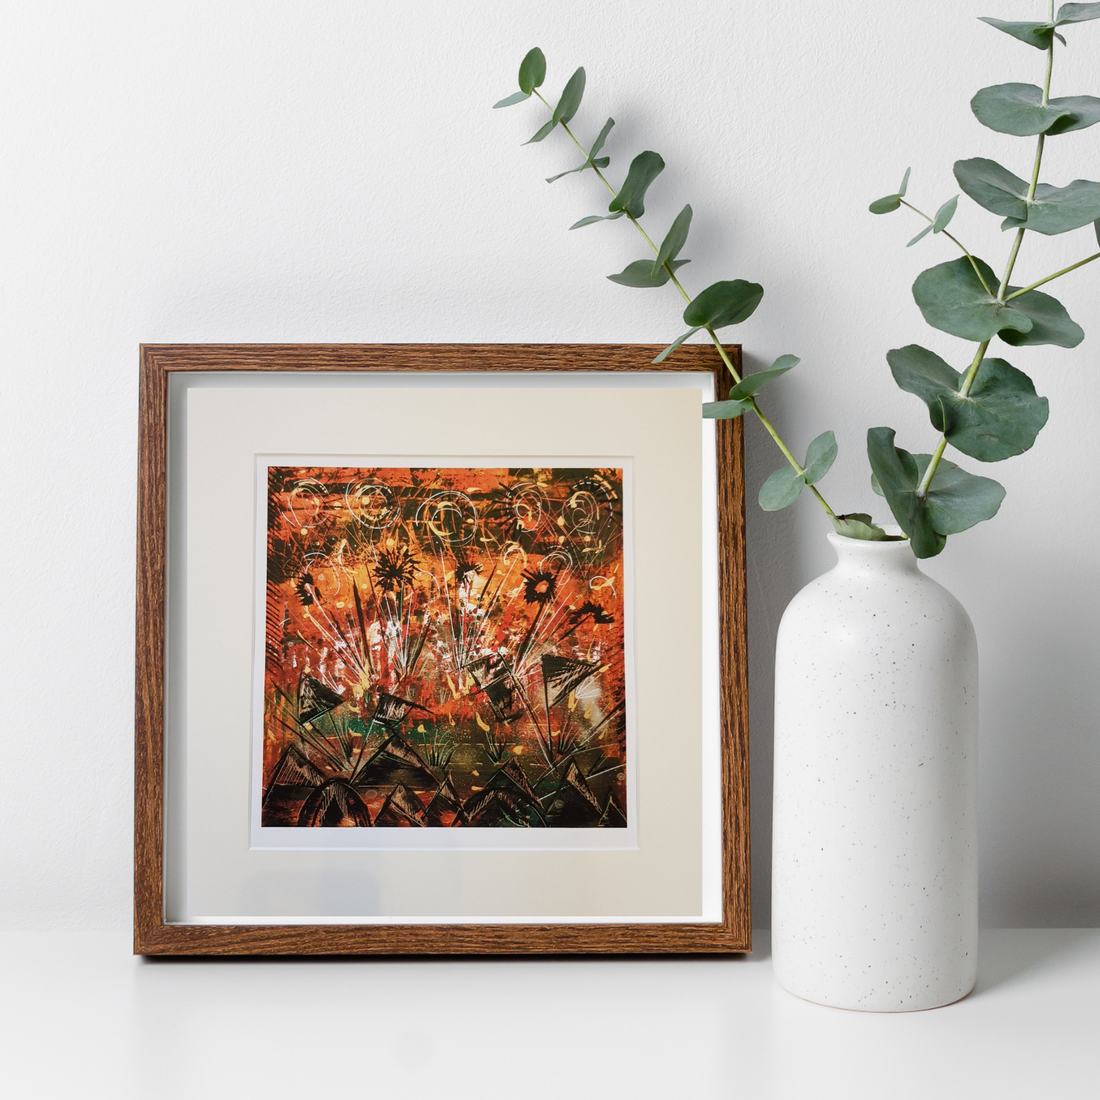 Refresh Your Home Decor with Floral and Festival Style Affordable Artwork